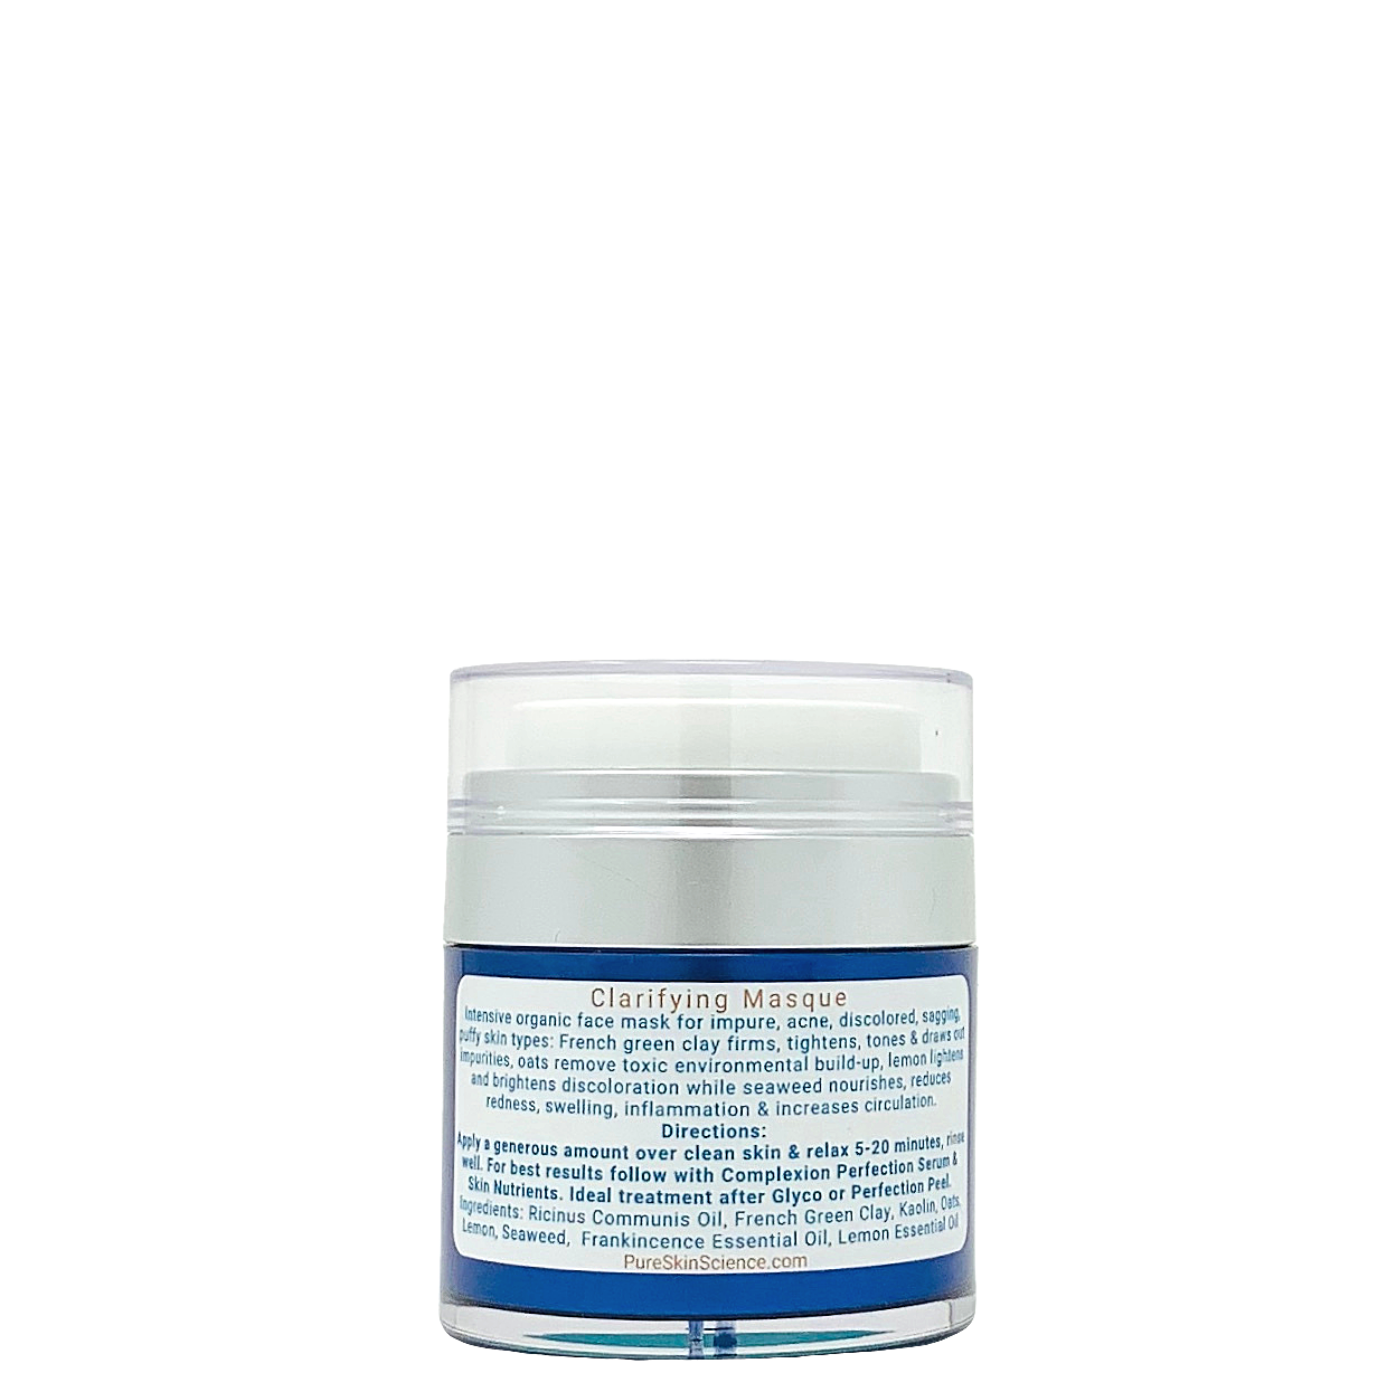 Clarifying Masque by Pure Skin Science